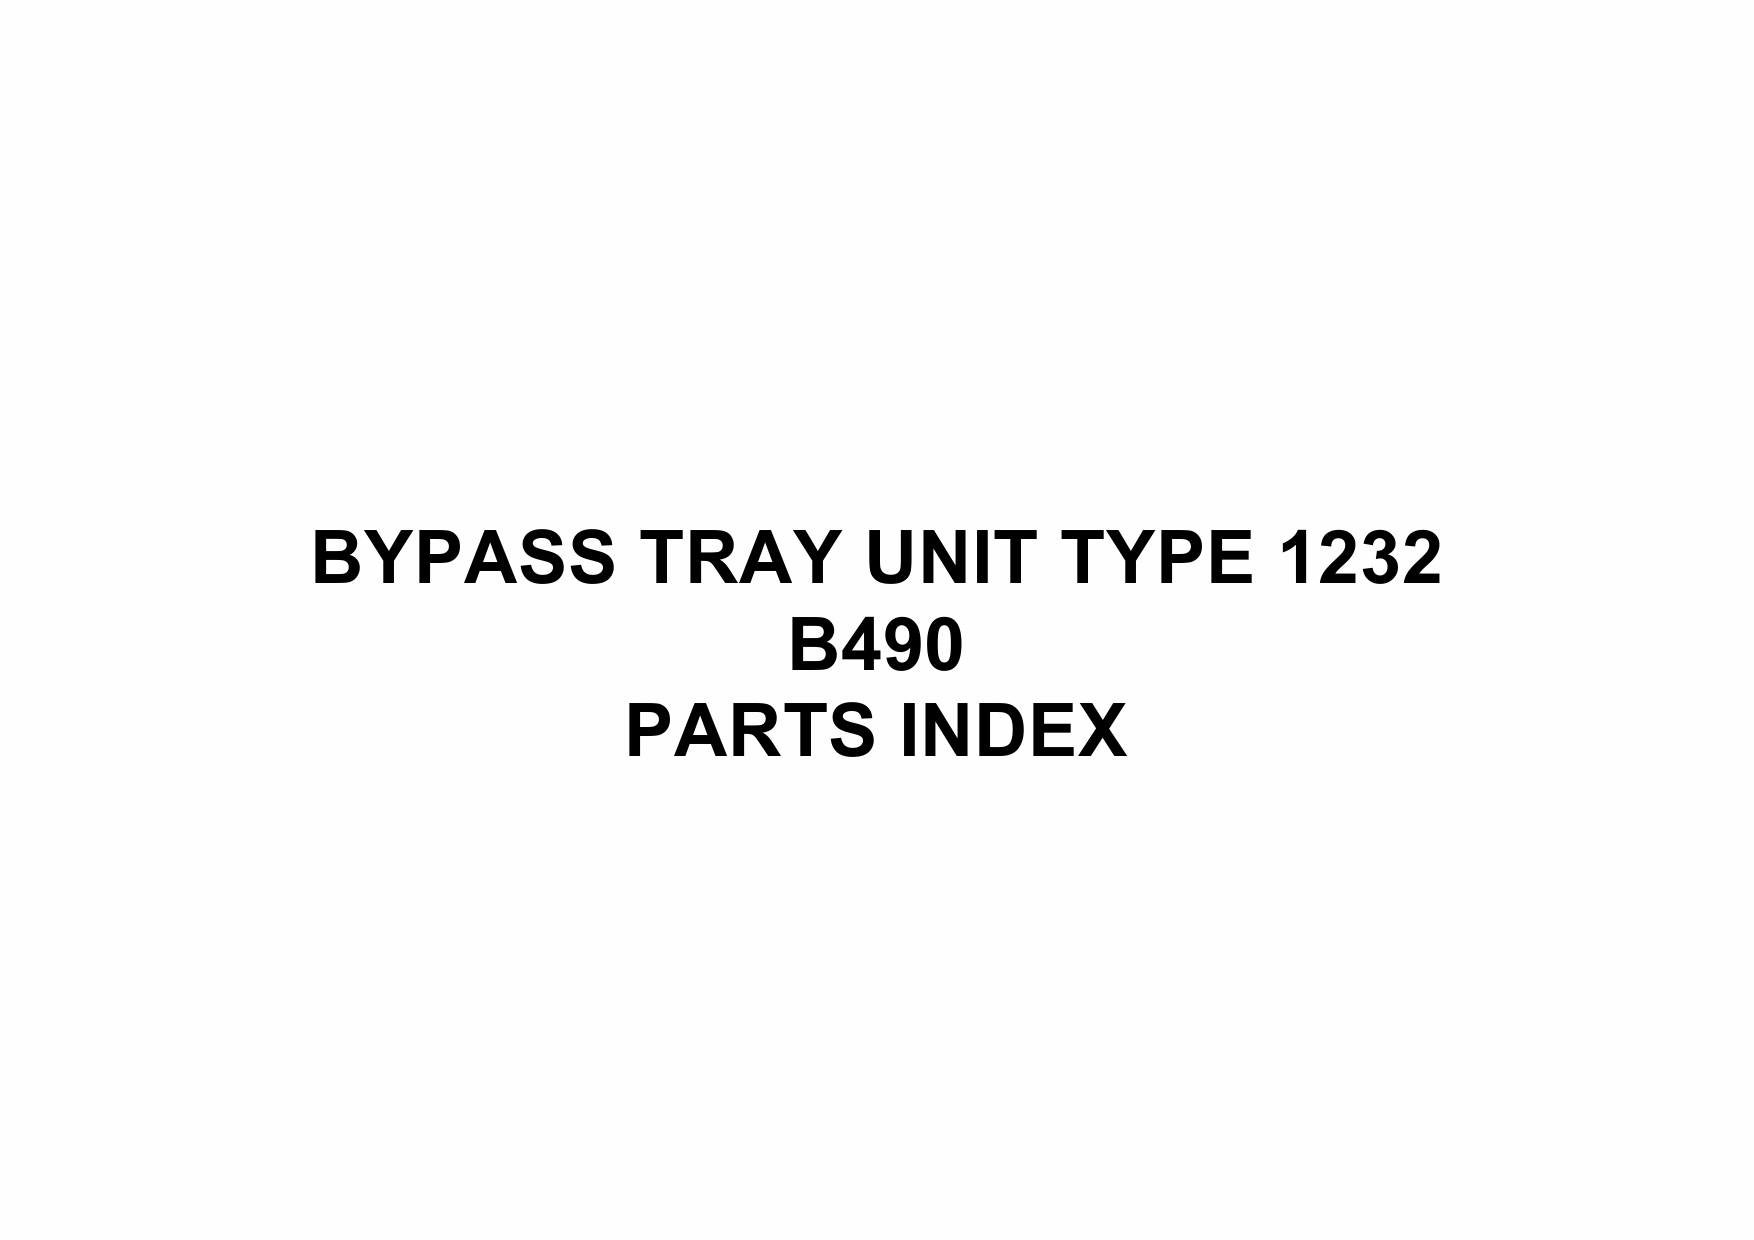 RICOH Options B490 BYPASS-TRAY-UNIT-TYPE-1232 Parts Catalog PDF download-5